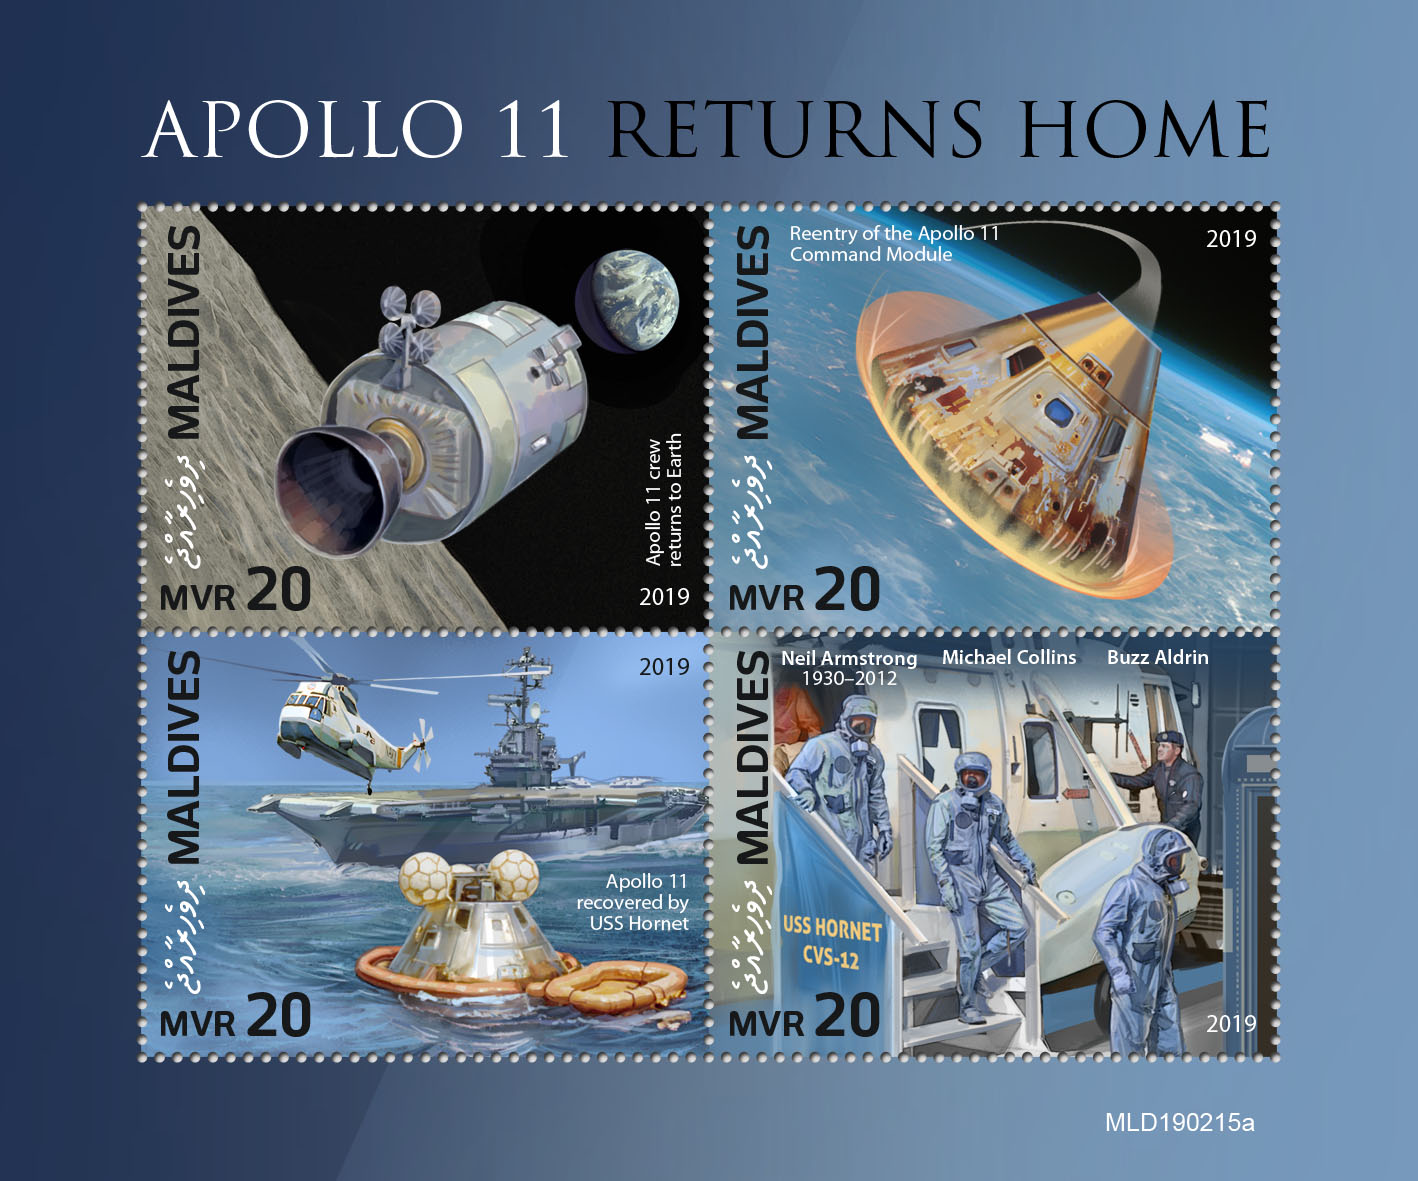 Apollo 11 - Issue of Maldives postage stamps